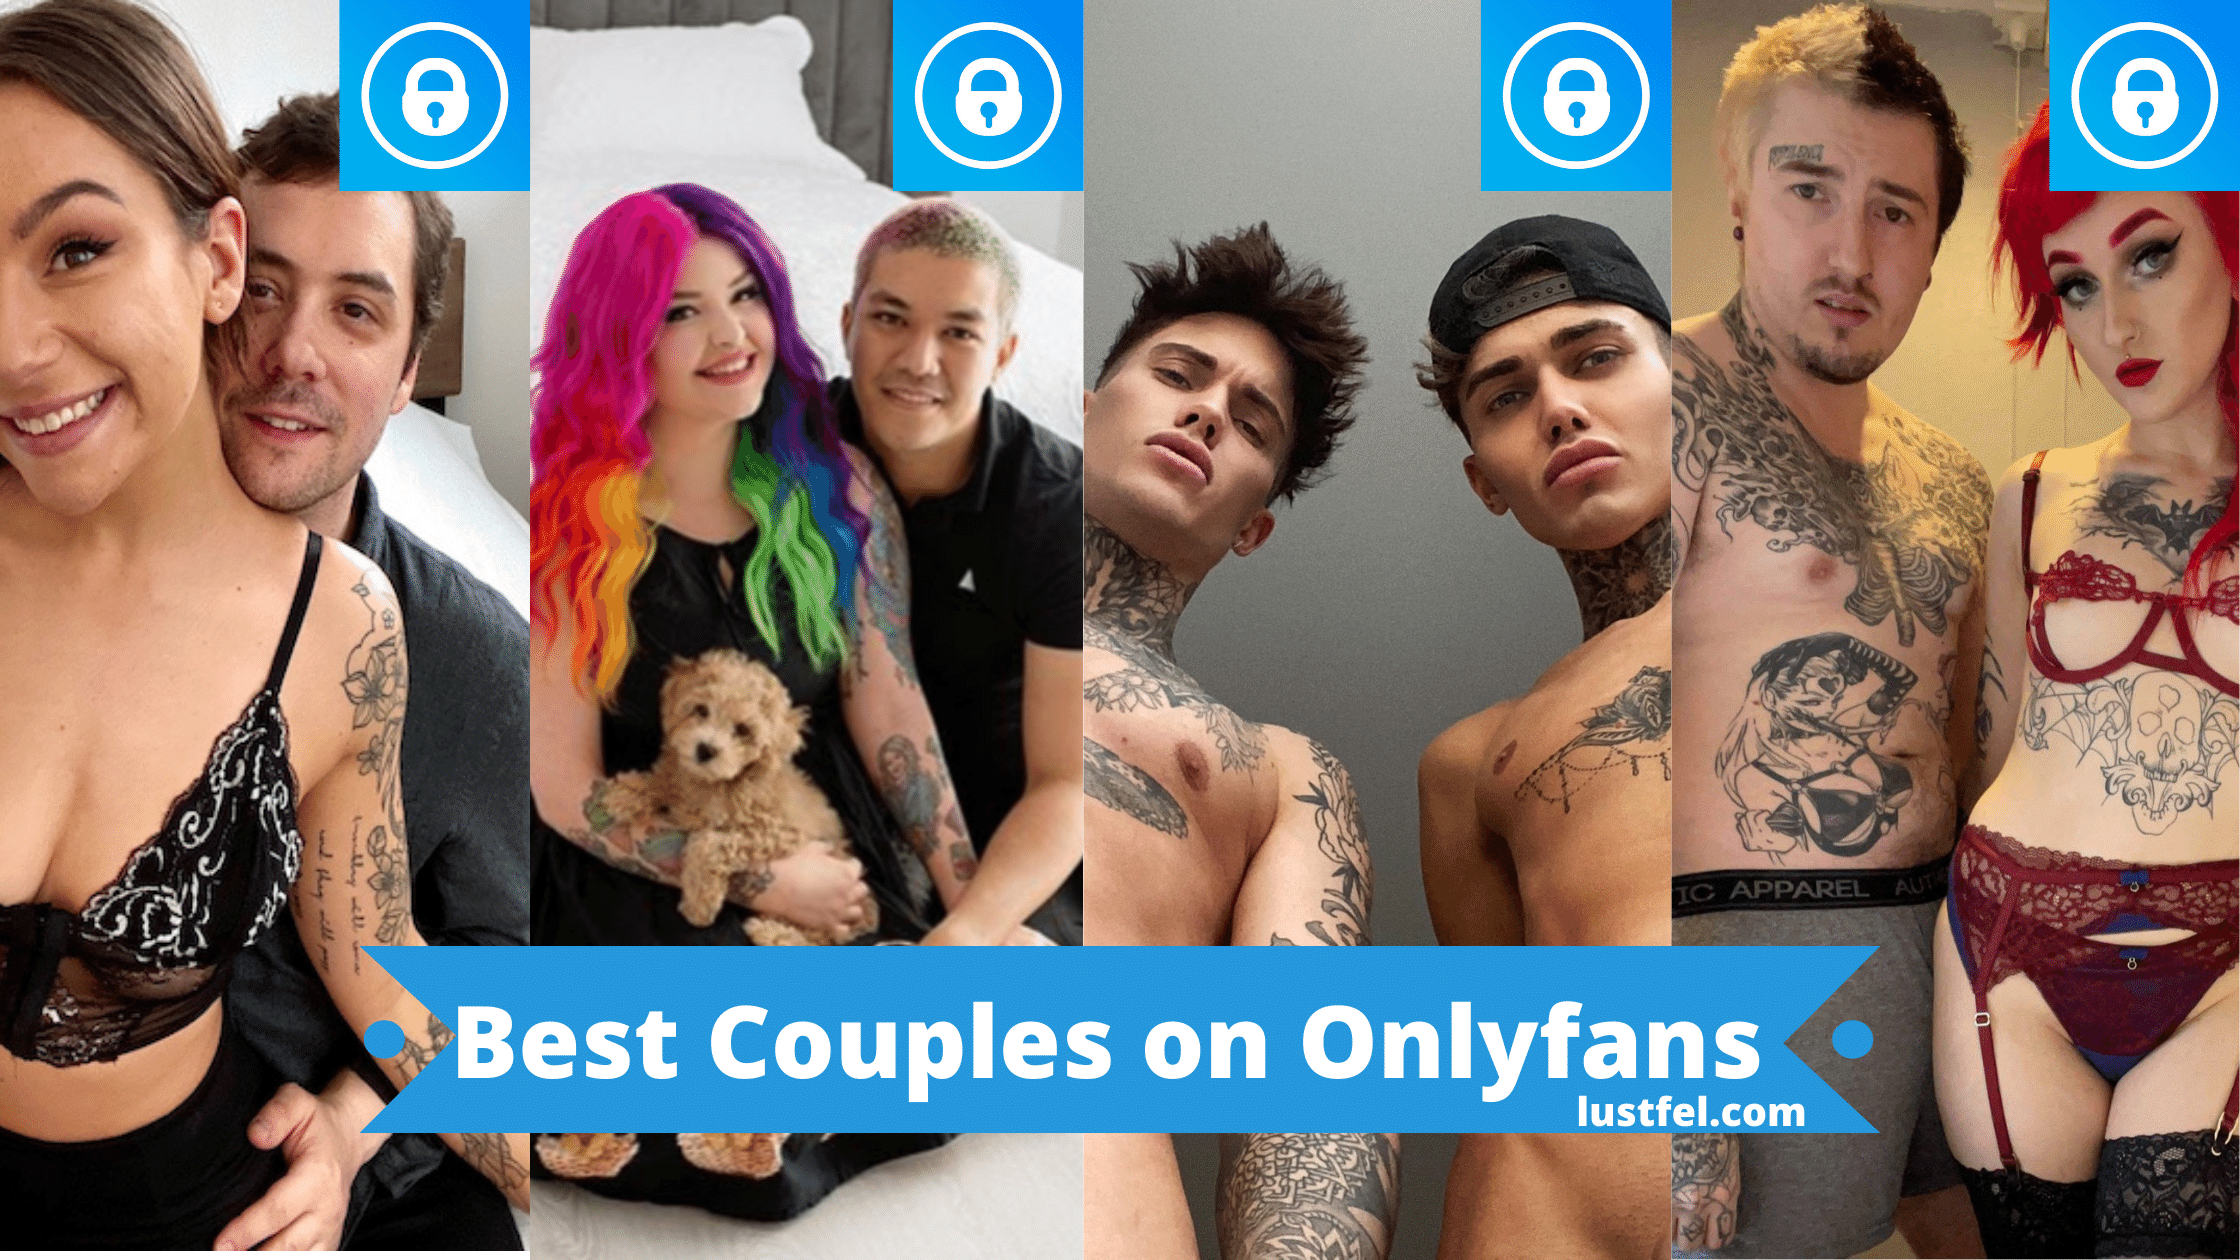 Couples only fans